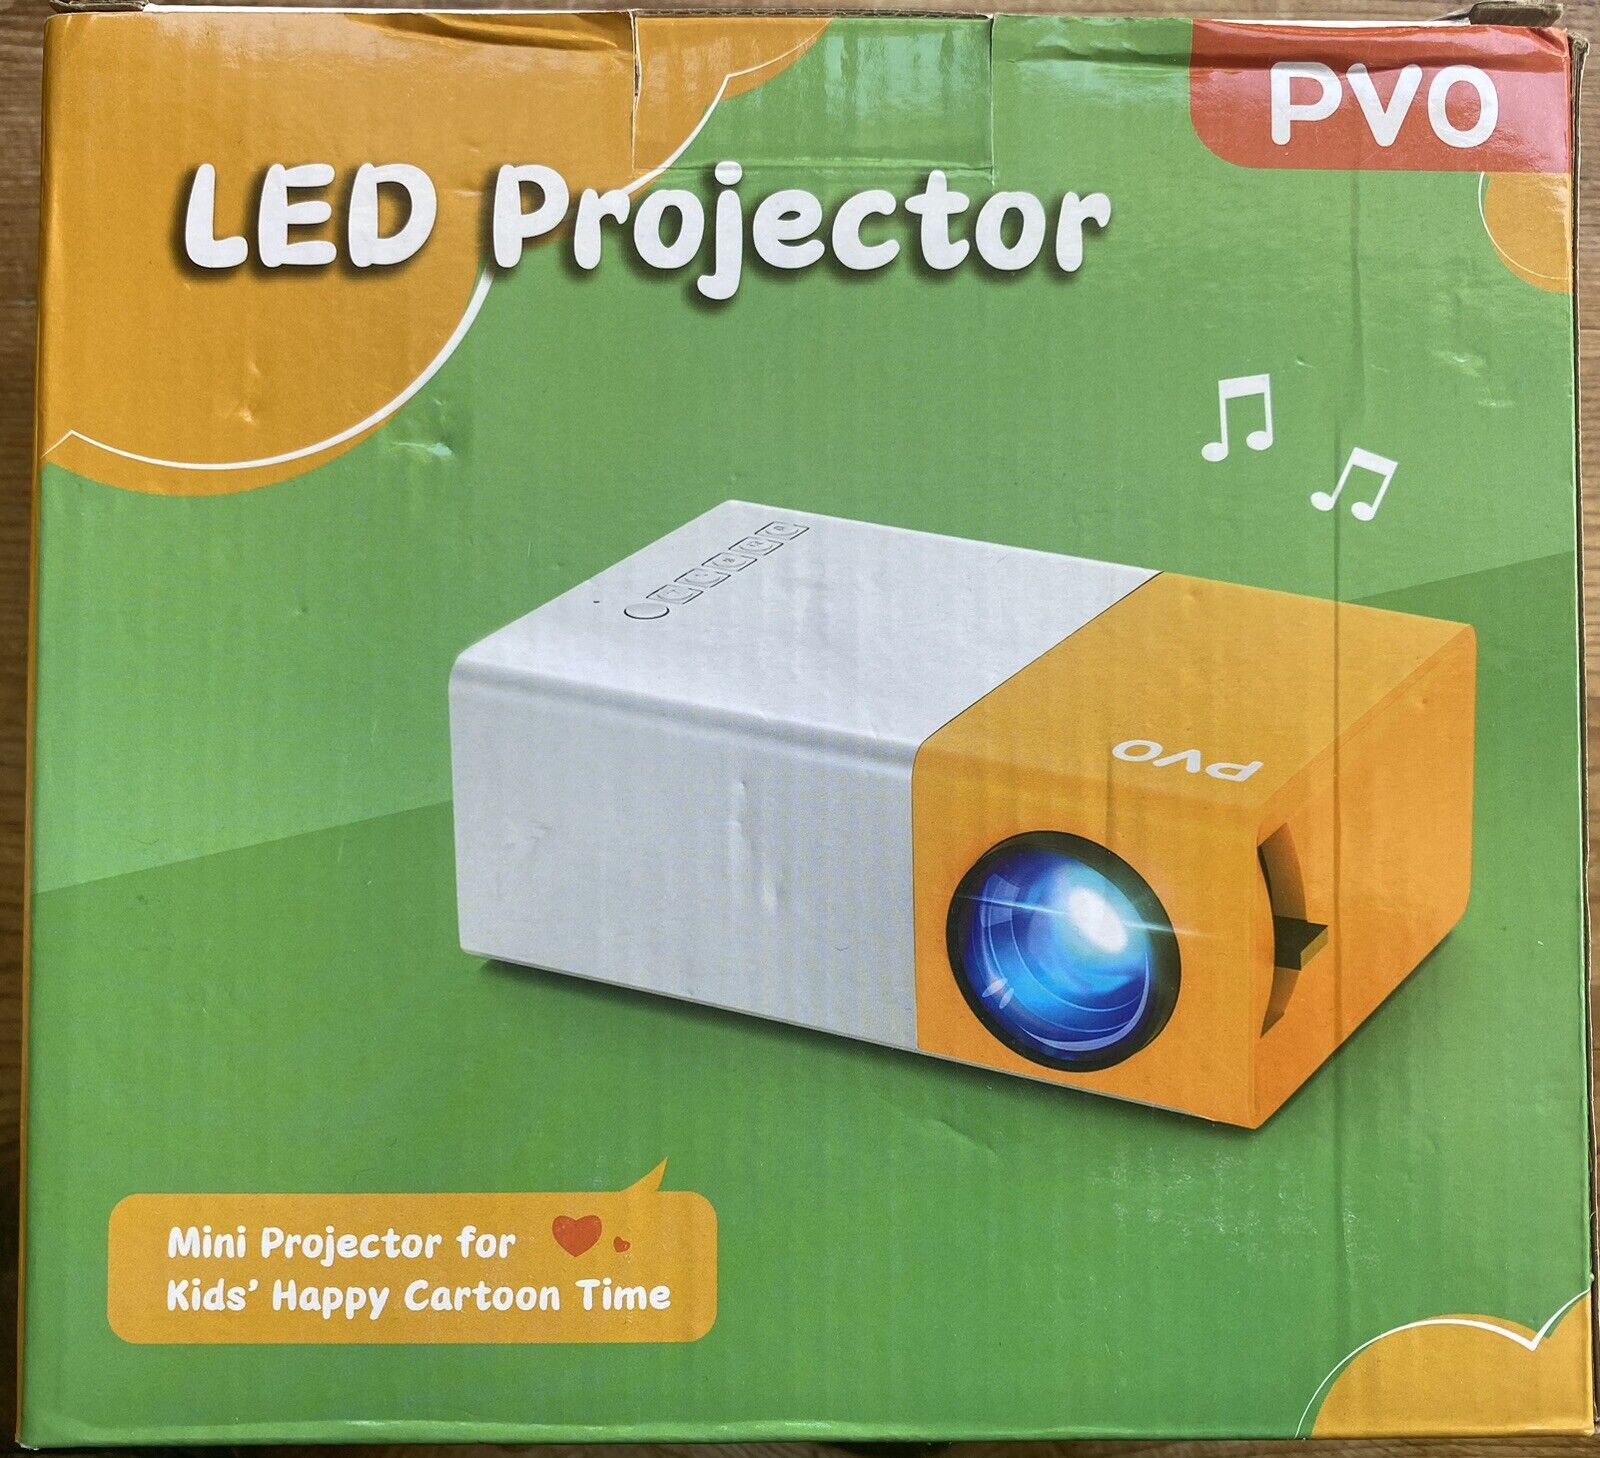 PVO LED Mini Projector YG300 Pro - Brand New - great for kids, home movies